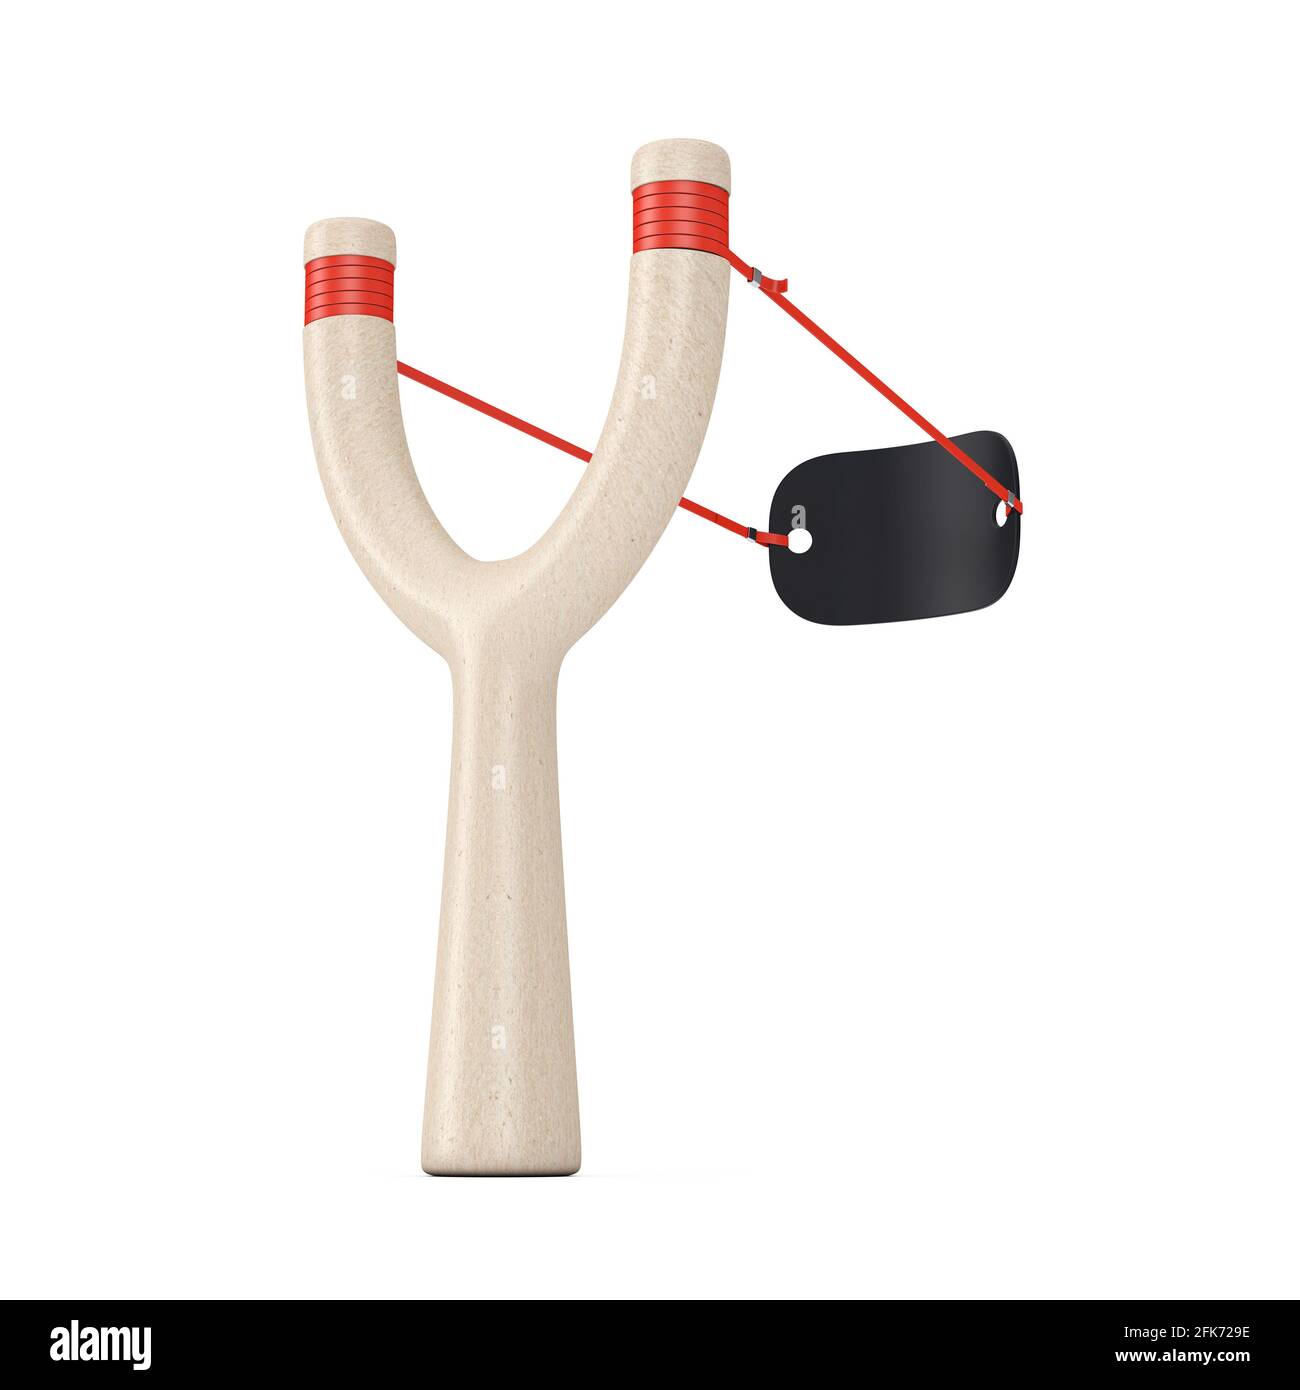 Danger Wooden Slingshot Toy Weapon on a white background. 3d Rendering Stock Photo